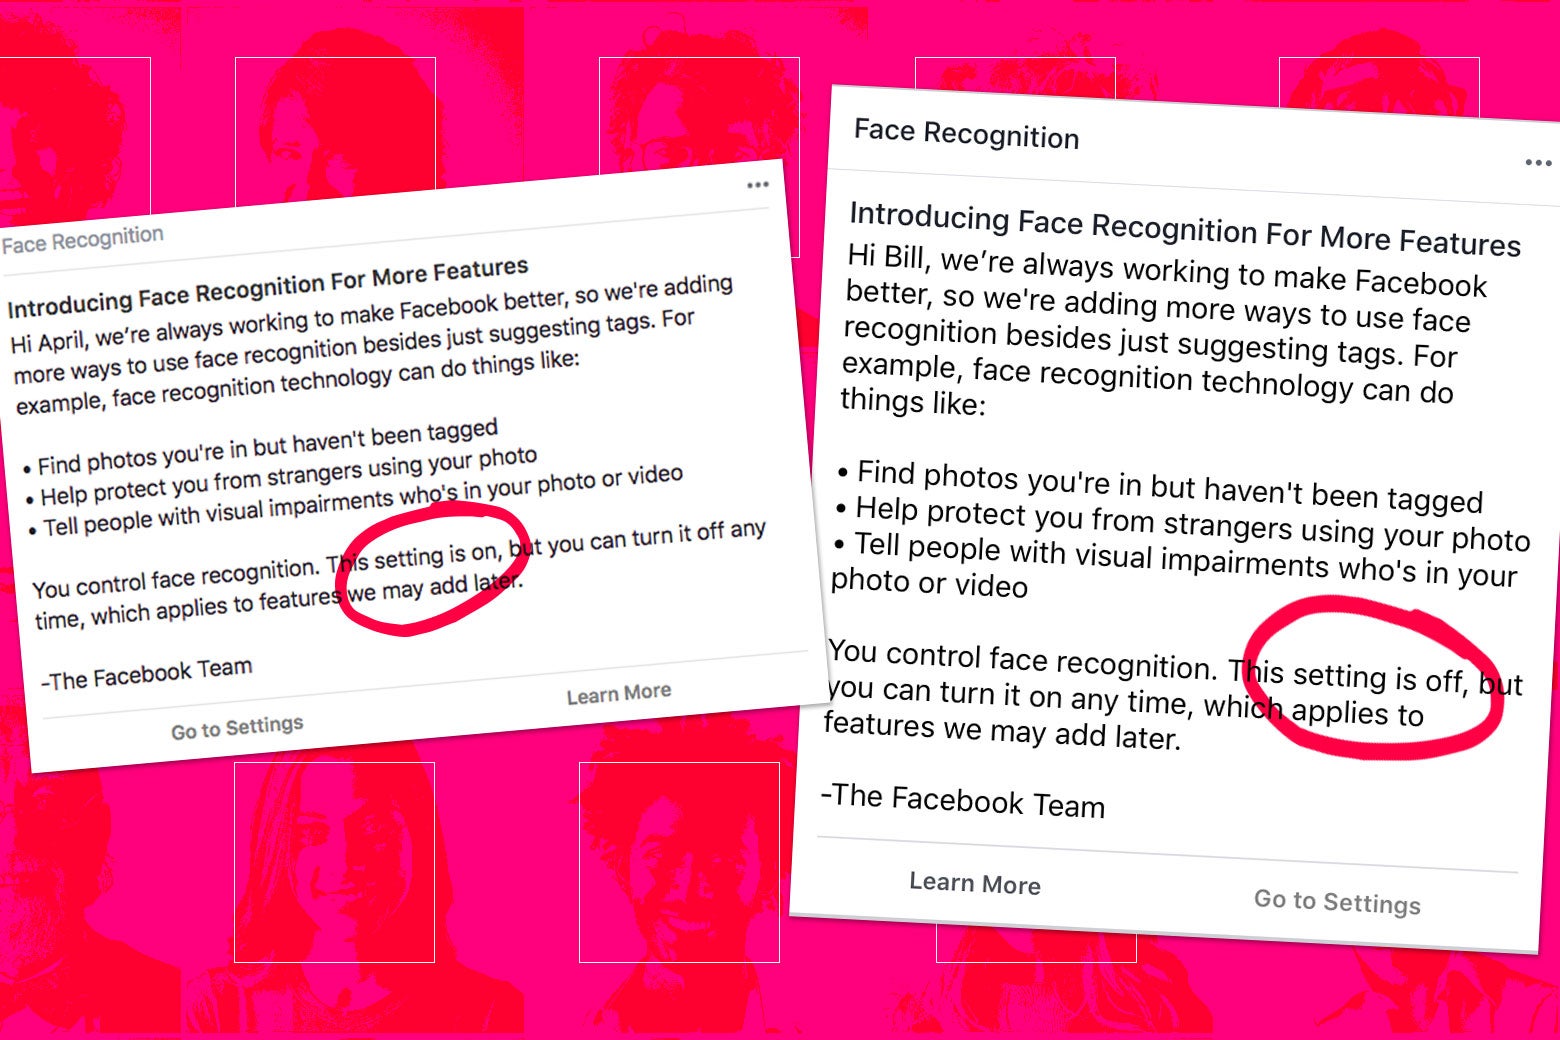 Notifications that two Facebook users have received recently about facial recognition features. One says that the setting is off, while the other says the setting is on.